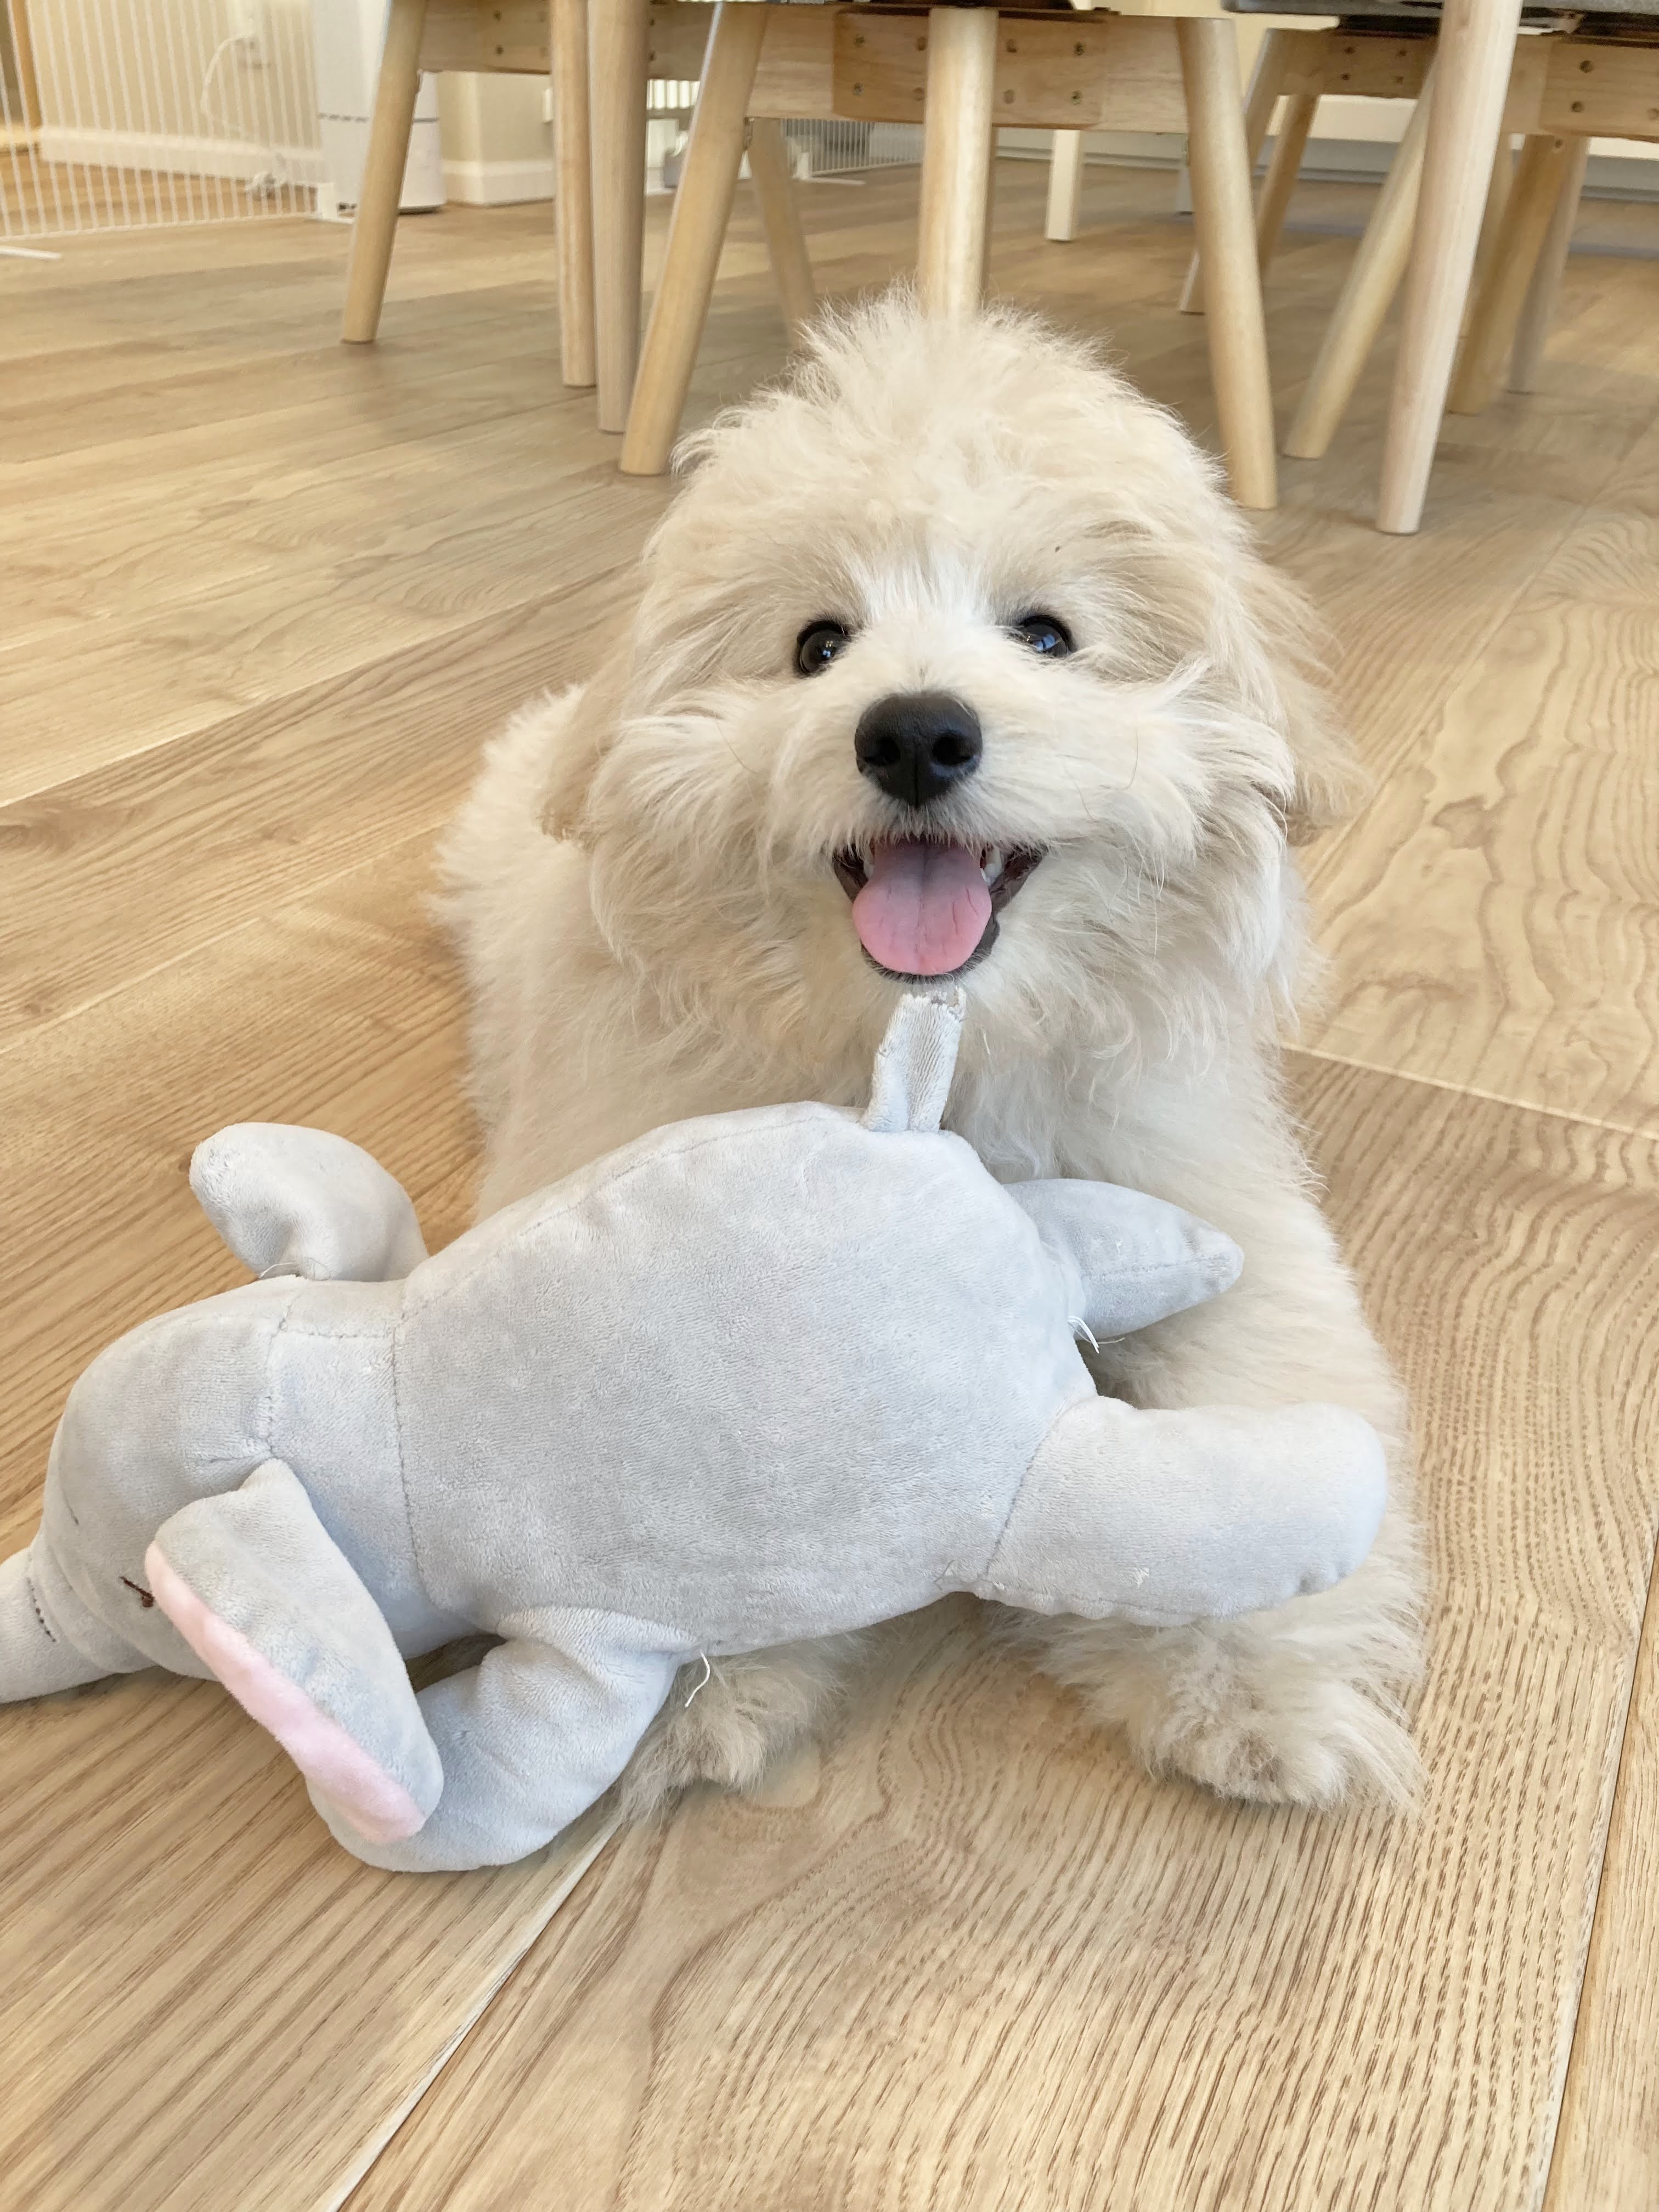 Forte smiling with his favorite stuffed toy of an elephant